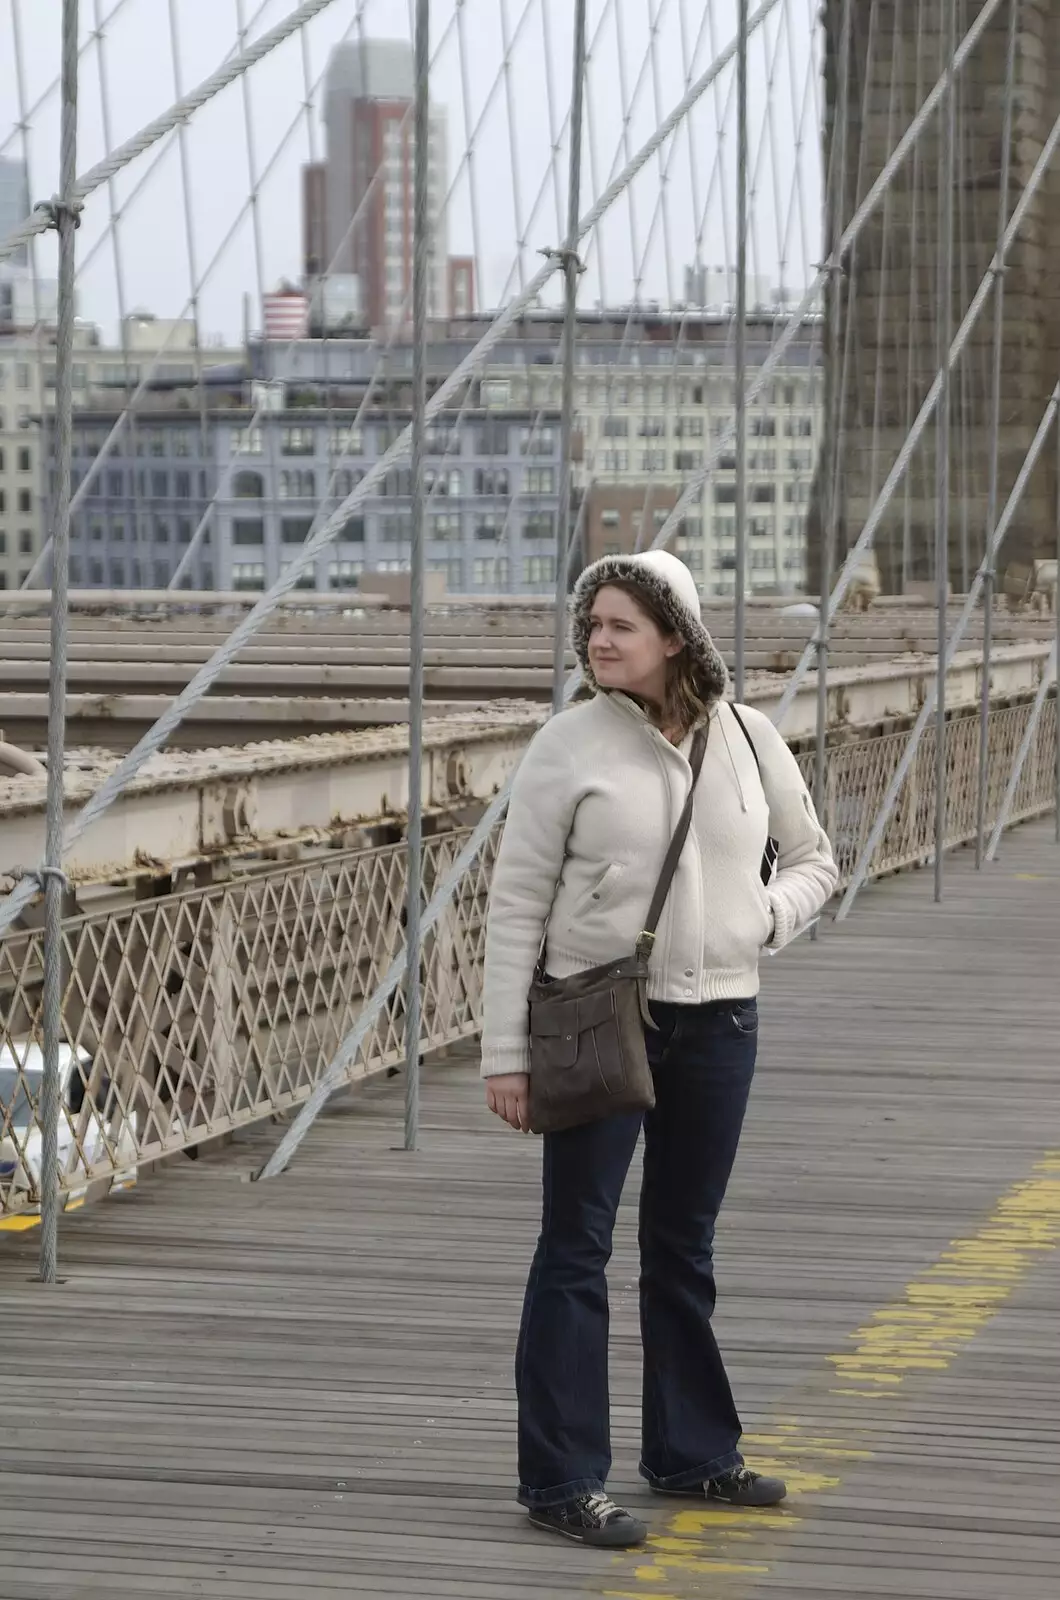 Isobel pauses, from Crossing Brooklyn Bridge, New York, US - 26th March 2007